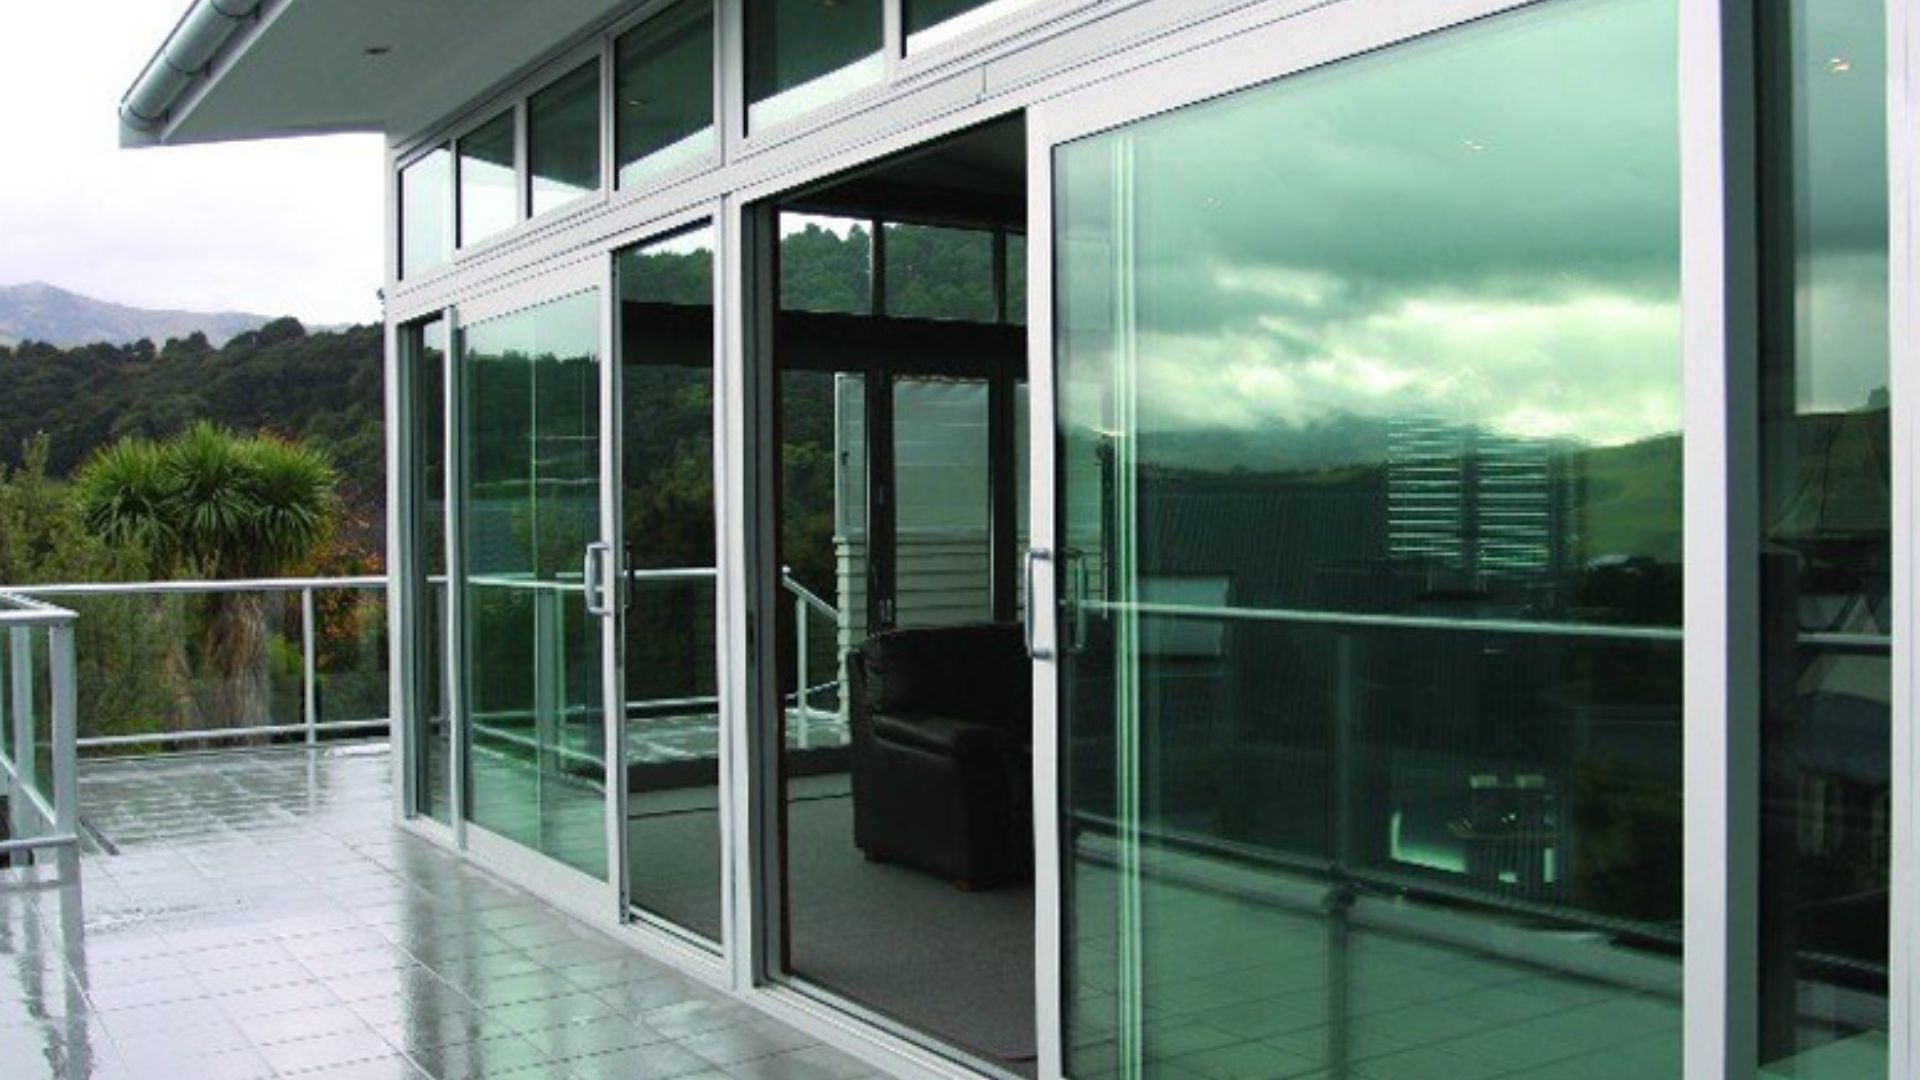 The Benefits of Glass and Aluminium in Architecture